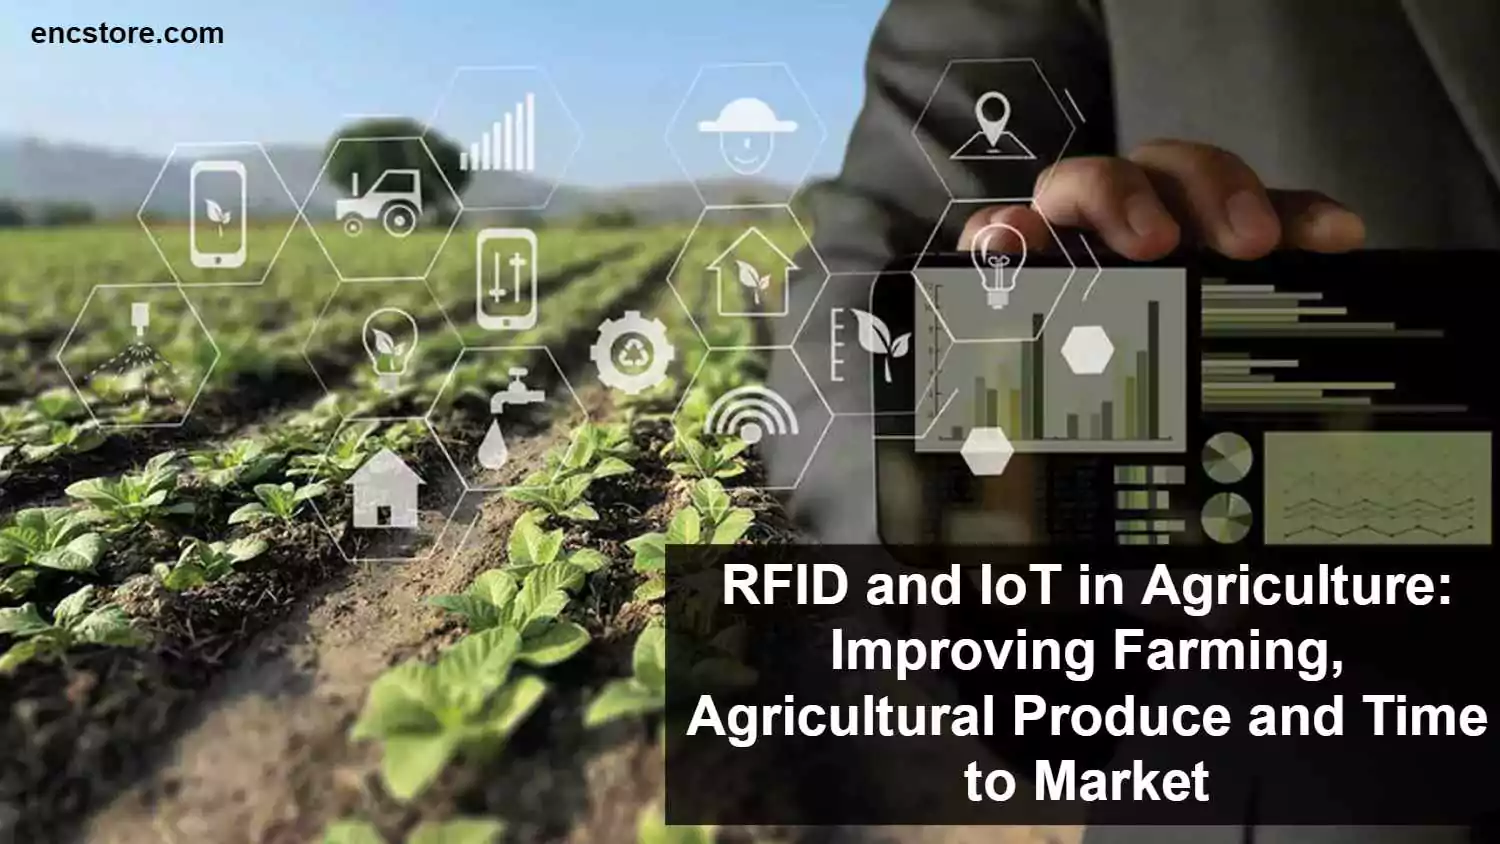 RFID and IoT in Agriculture